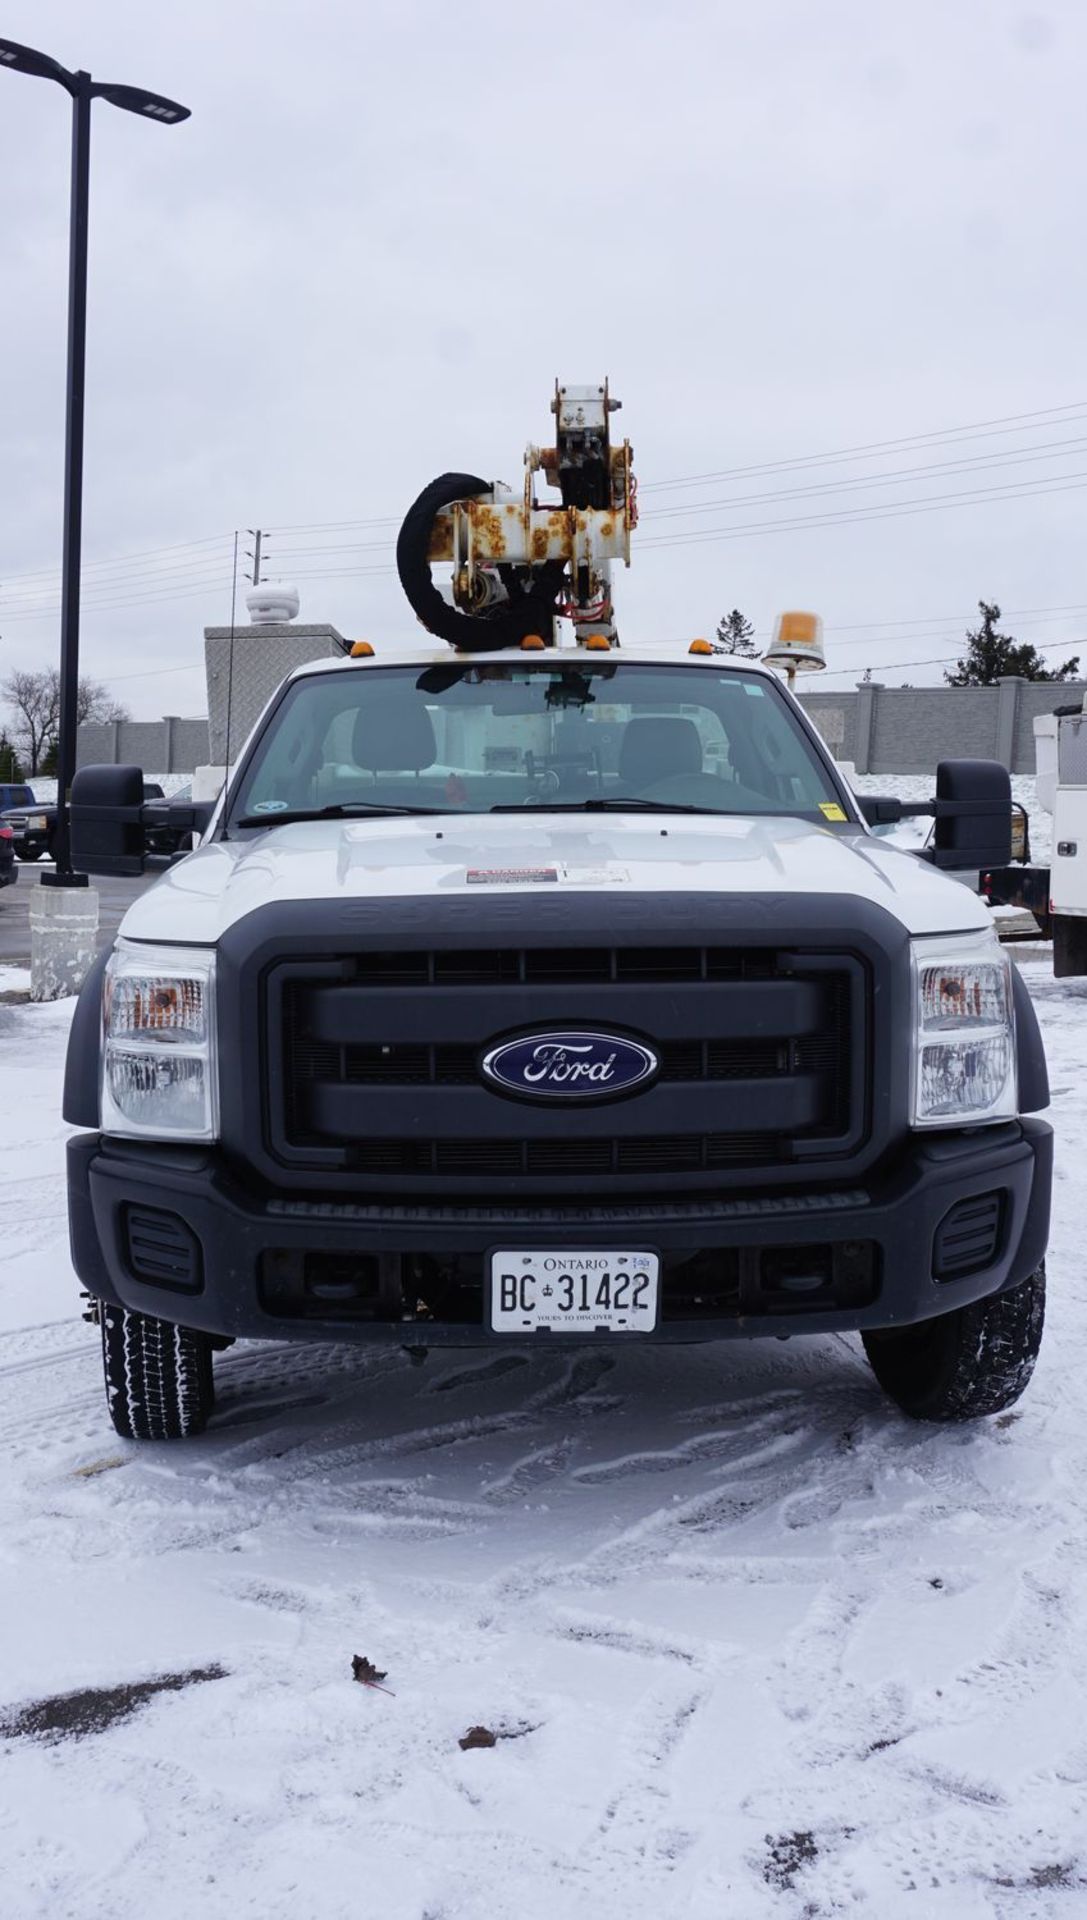 2015 ALTEC AT37G ARTICULATING TELESCOPIC BOOM & BUCKET MOUNTED ON 2015 FORD F550XL SUPER DUTY TRUCK - Image 3 of 18